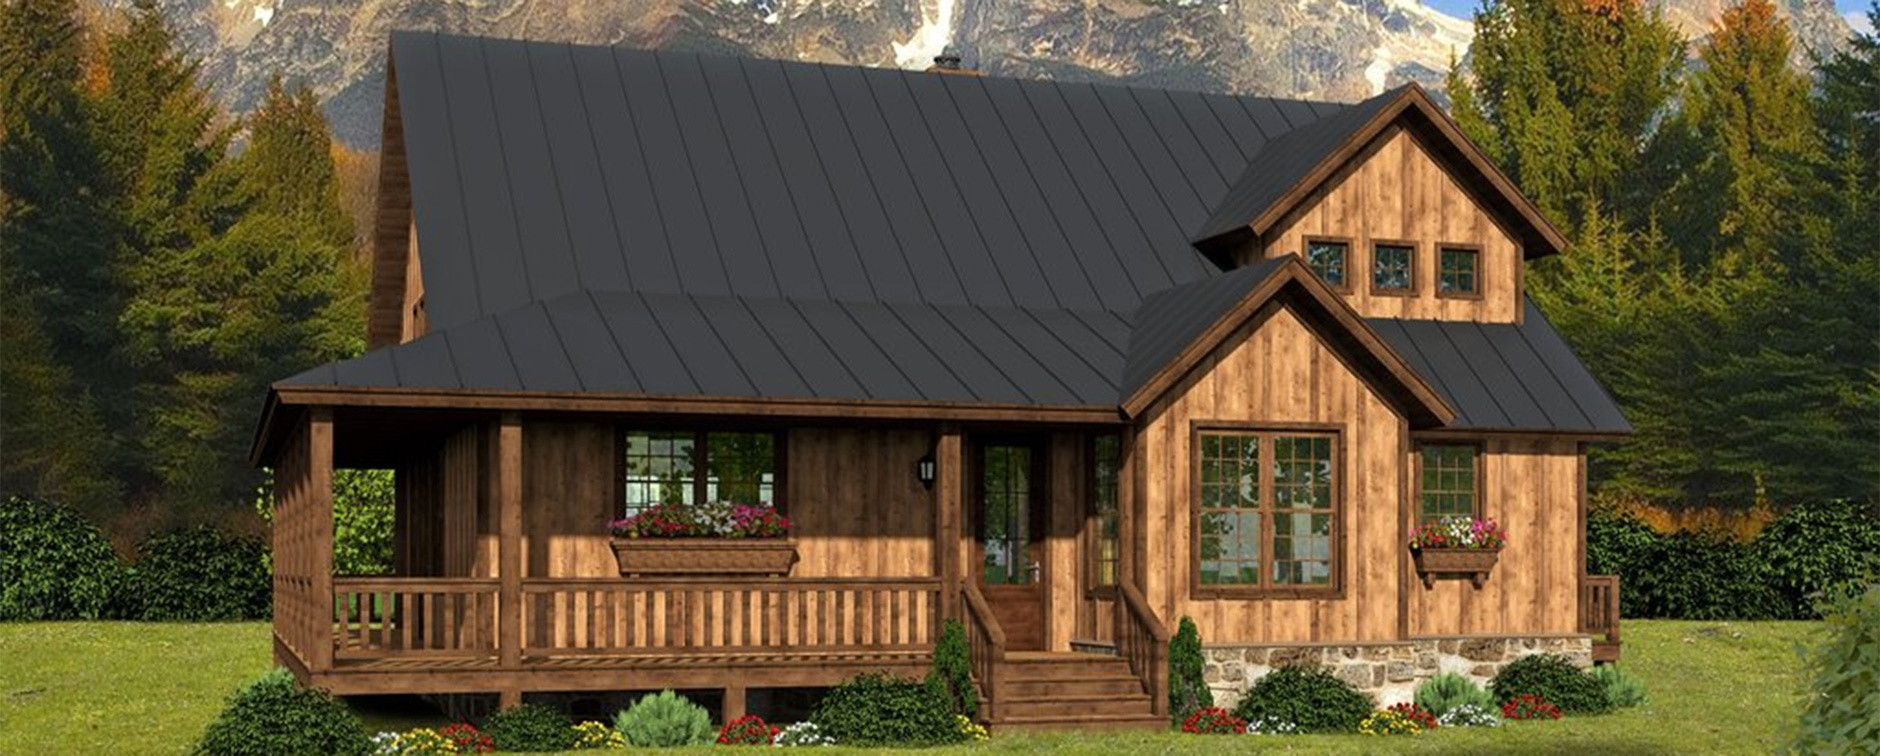 Cabin House Plans and A-Frame Floor Plans